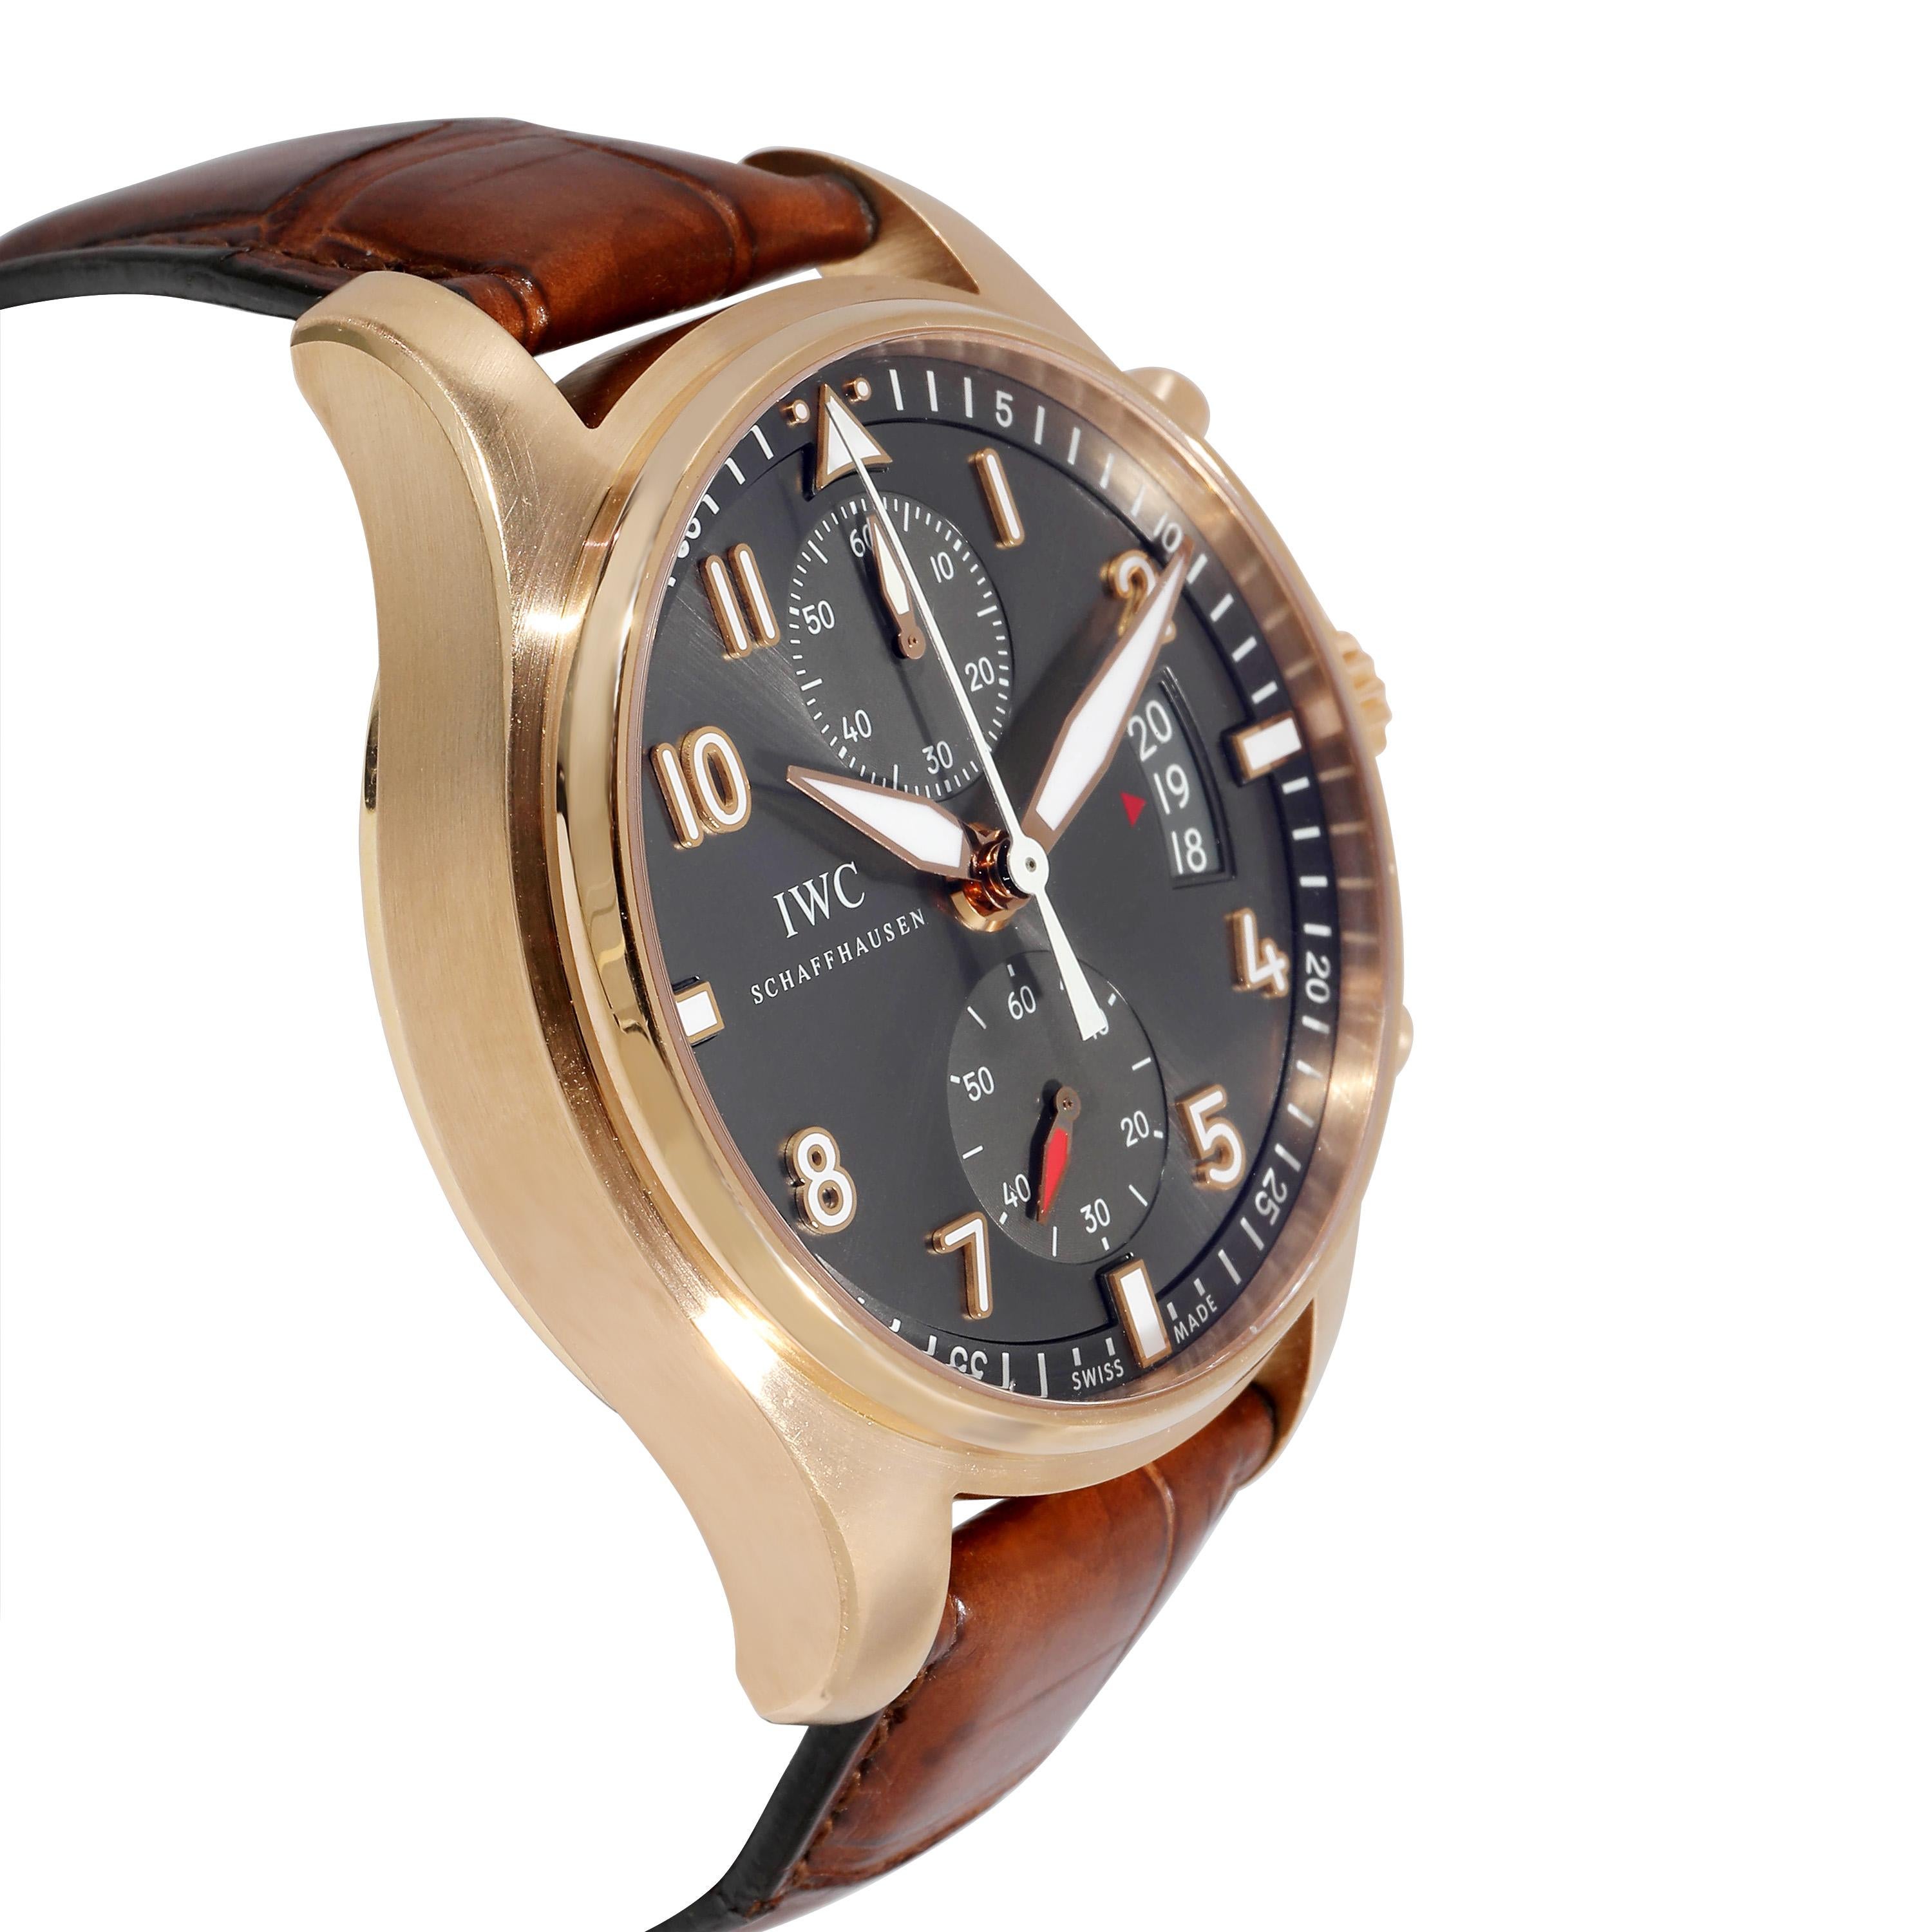 IWC Pilot Spitfire IW387803 Men's Watch in 18kt Rose Gold

SKU: 131560

PRIMARY DETAILS
Brand: IWC
Model: Pilot Spitfire
Country of Origin: Switzerland
Movement Type: Mechanical: Automatic/Kinetic
Year Manufactured: 2018
Year of Manufacture: